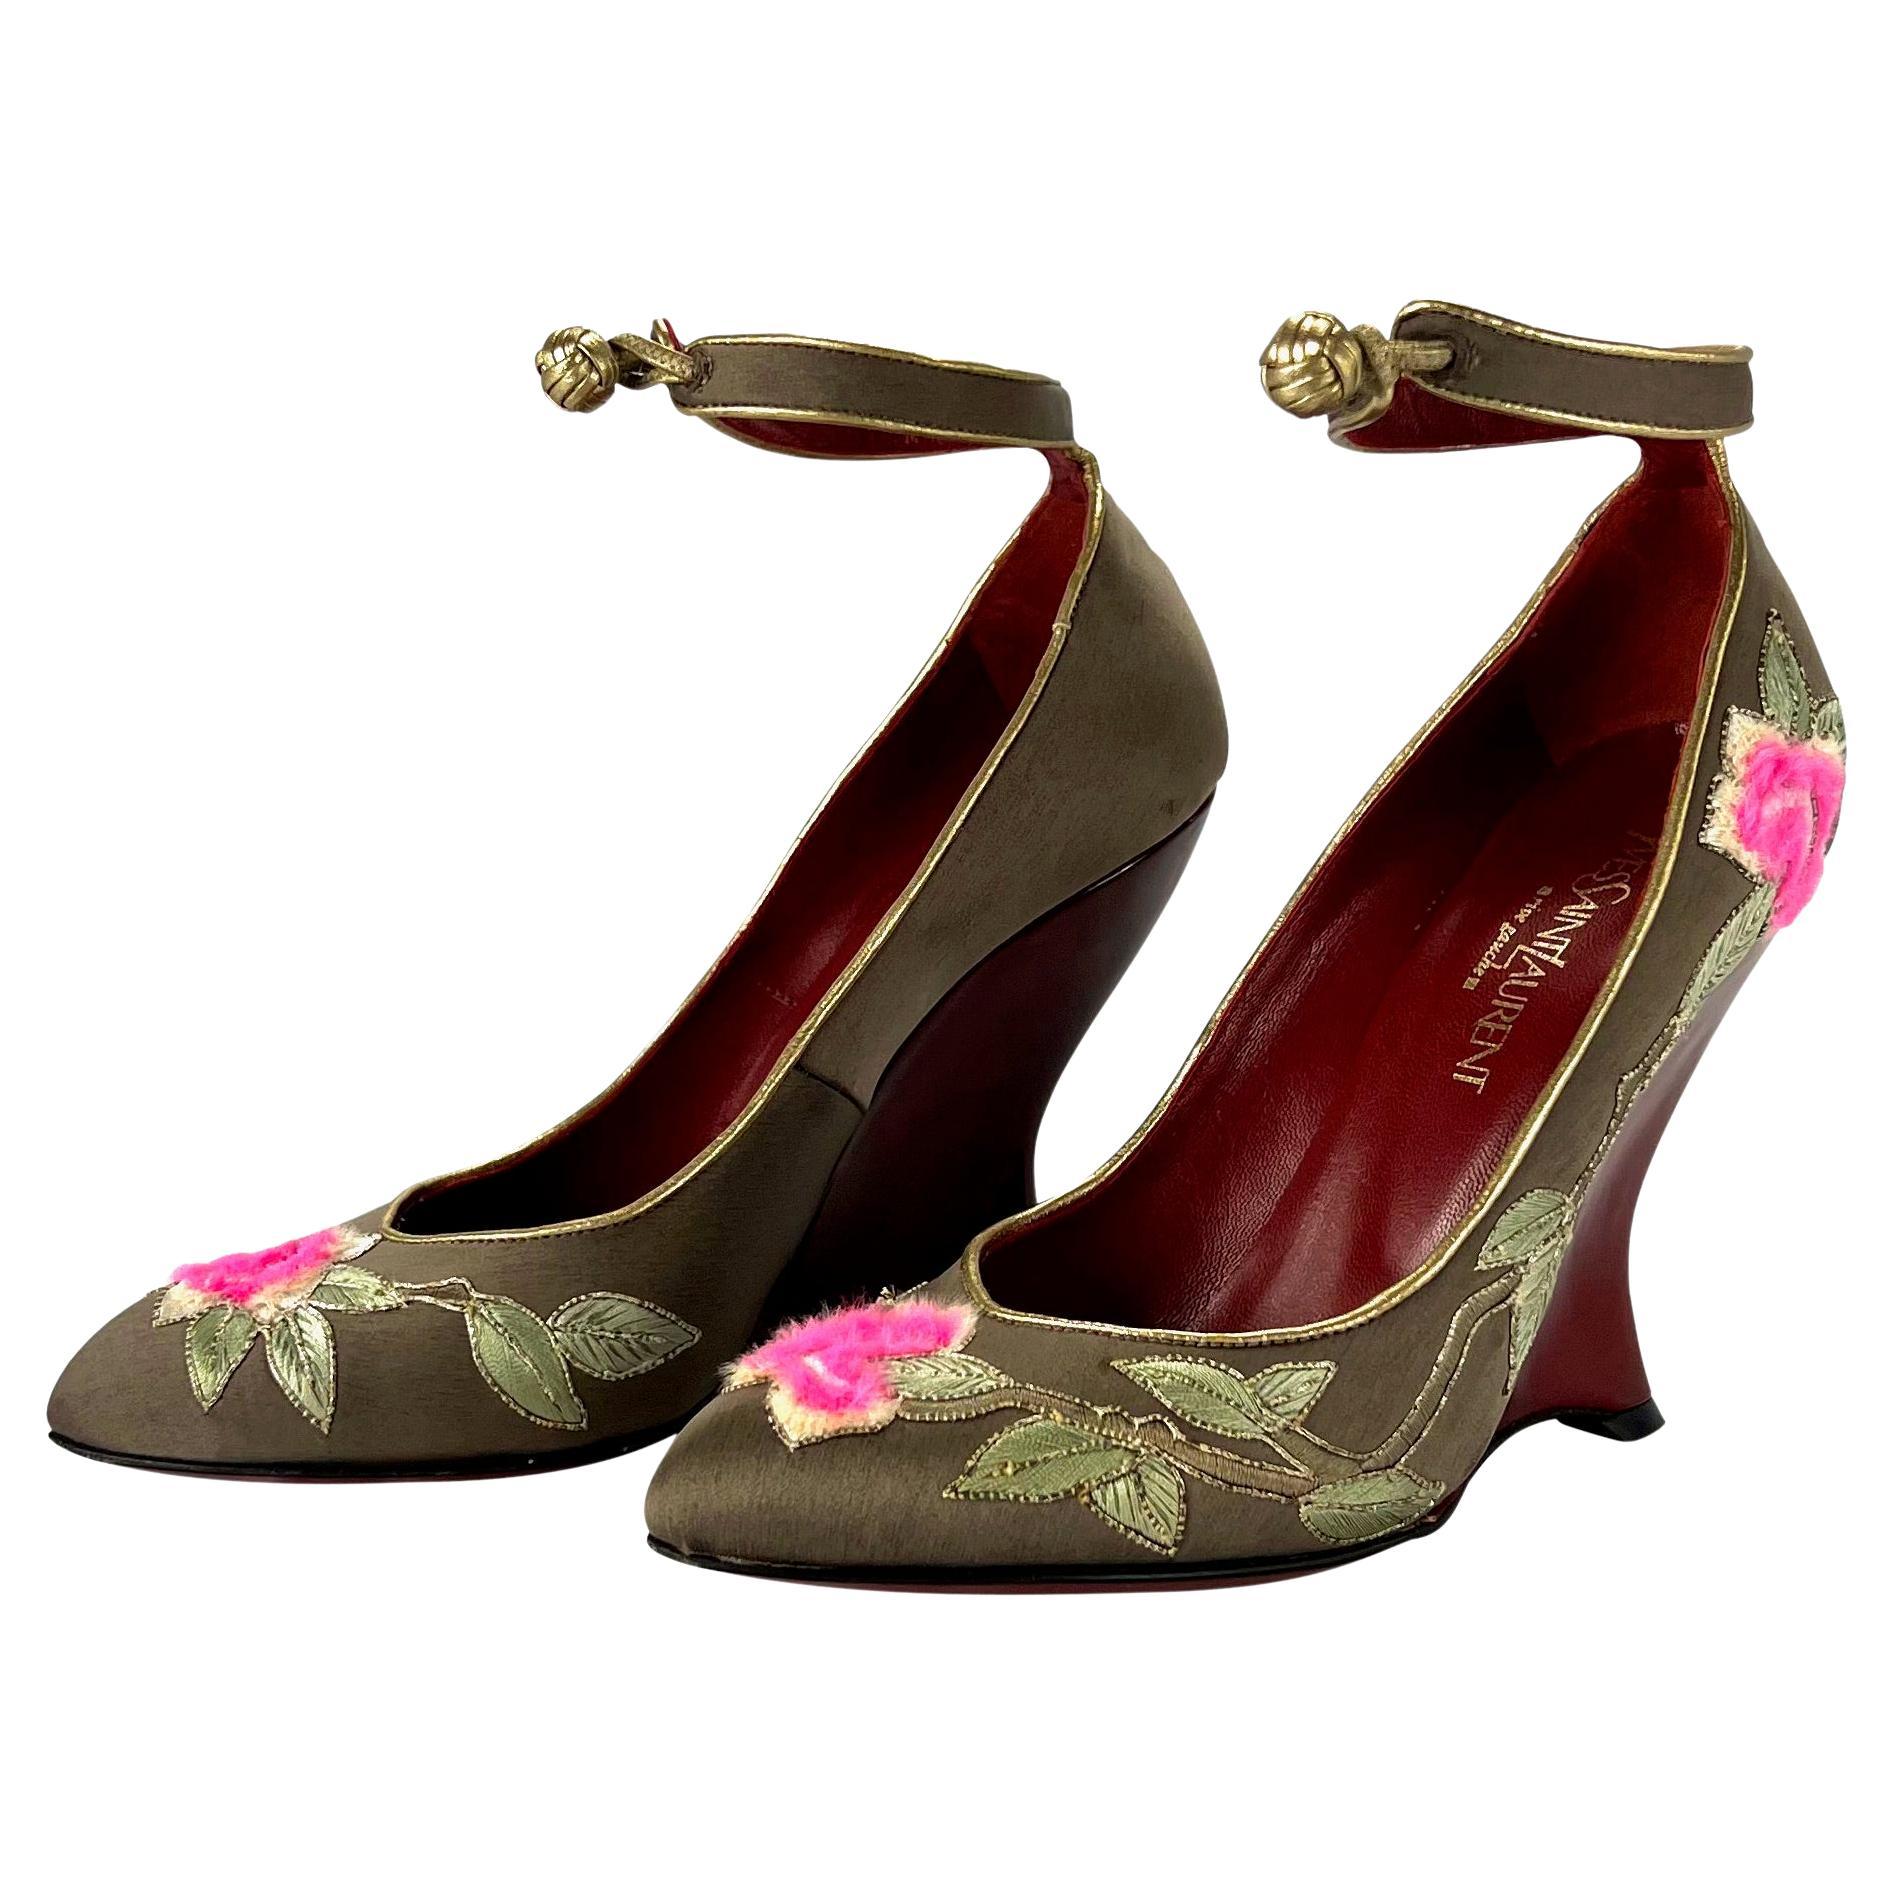 F/W 2004 Yves Saint Laurent by Tom Ford - Chaussures compensées brodées Chinoiserie Taille 36 Pour femmes en vente